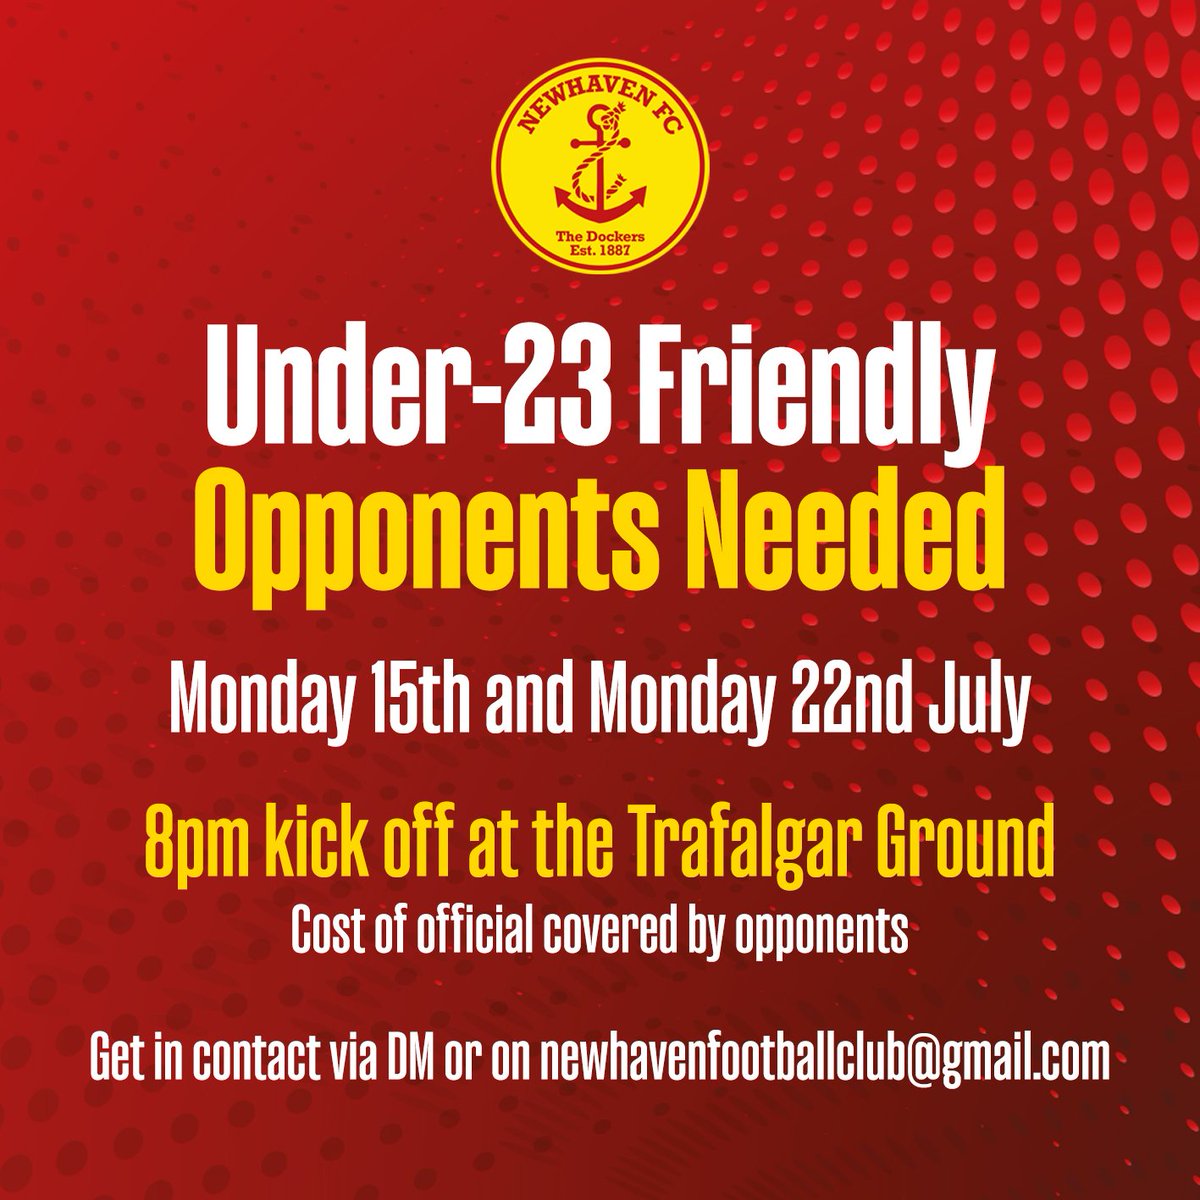 𝗢𝗽𝗽𝗼𝗻𝗲𝗻𝘁𝘀 𝗻𝗲𝗲𝗱𝗲𝗱! We are looking for opponents to play against our Under-23s in a couple of pre-season friendlies in July. Both at the Trafalgar Ground on Monday 15th/22nd, 8pm KOs. If interested, please contact us on here or email newhavenfootballclub@gmail.com